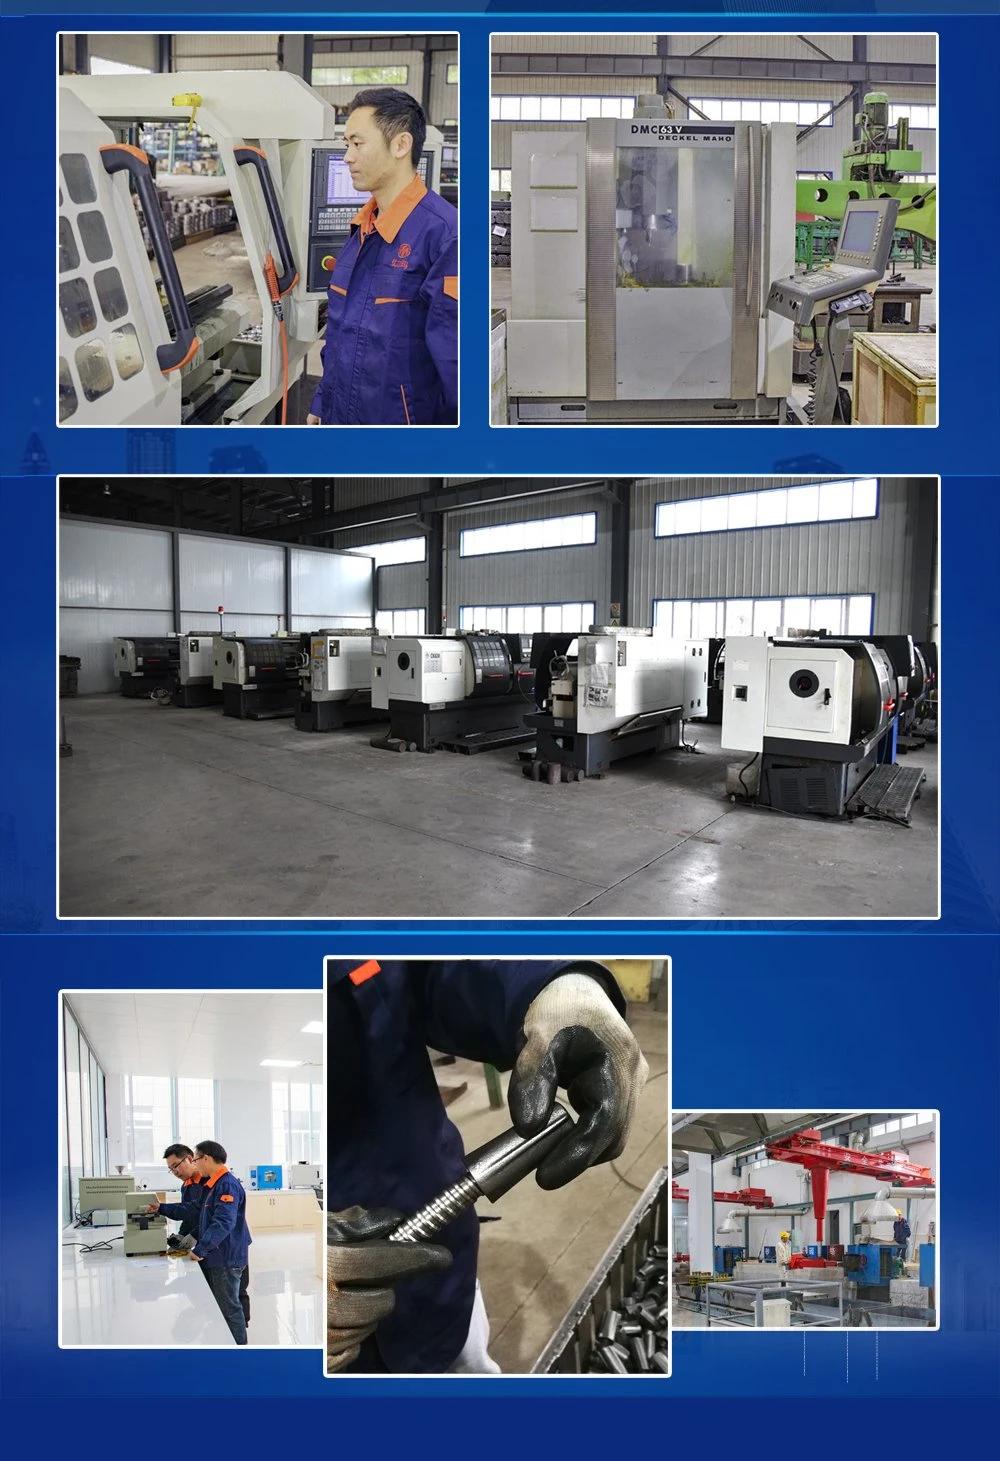 Machining, Construction, Equipment, Substation, Assembling, Accessories, Casting